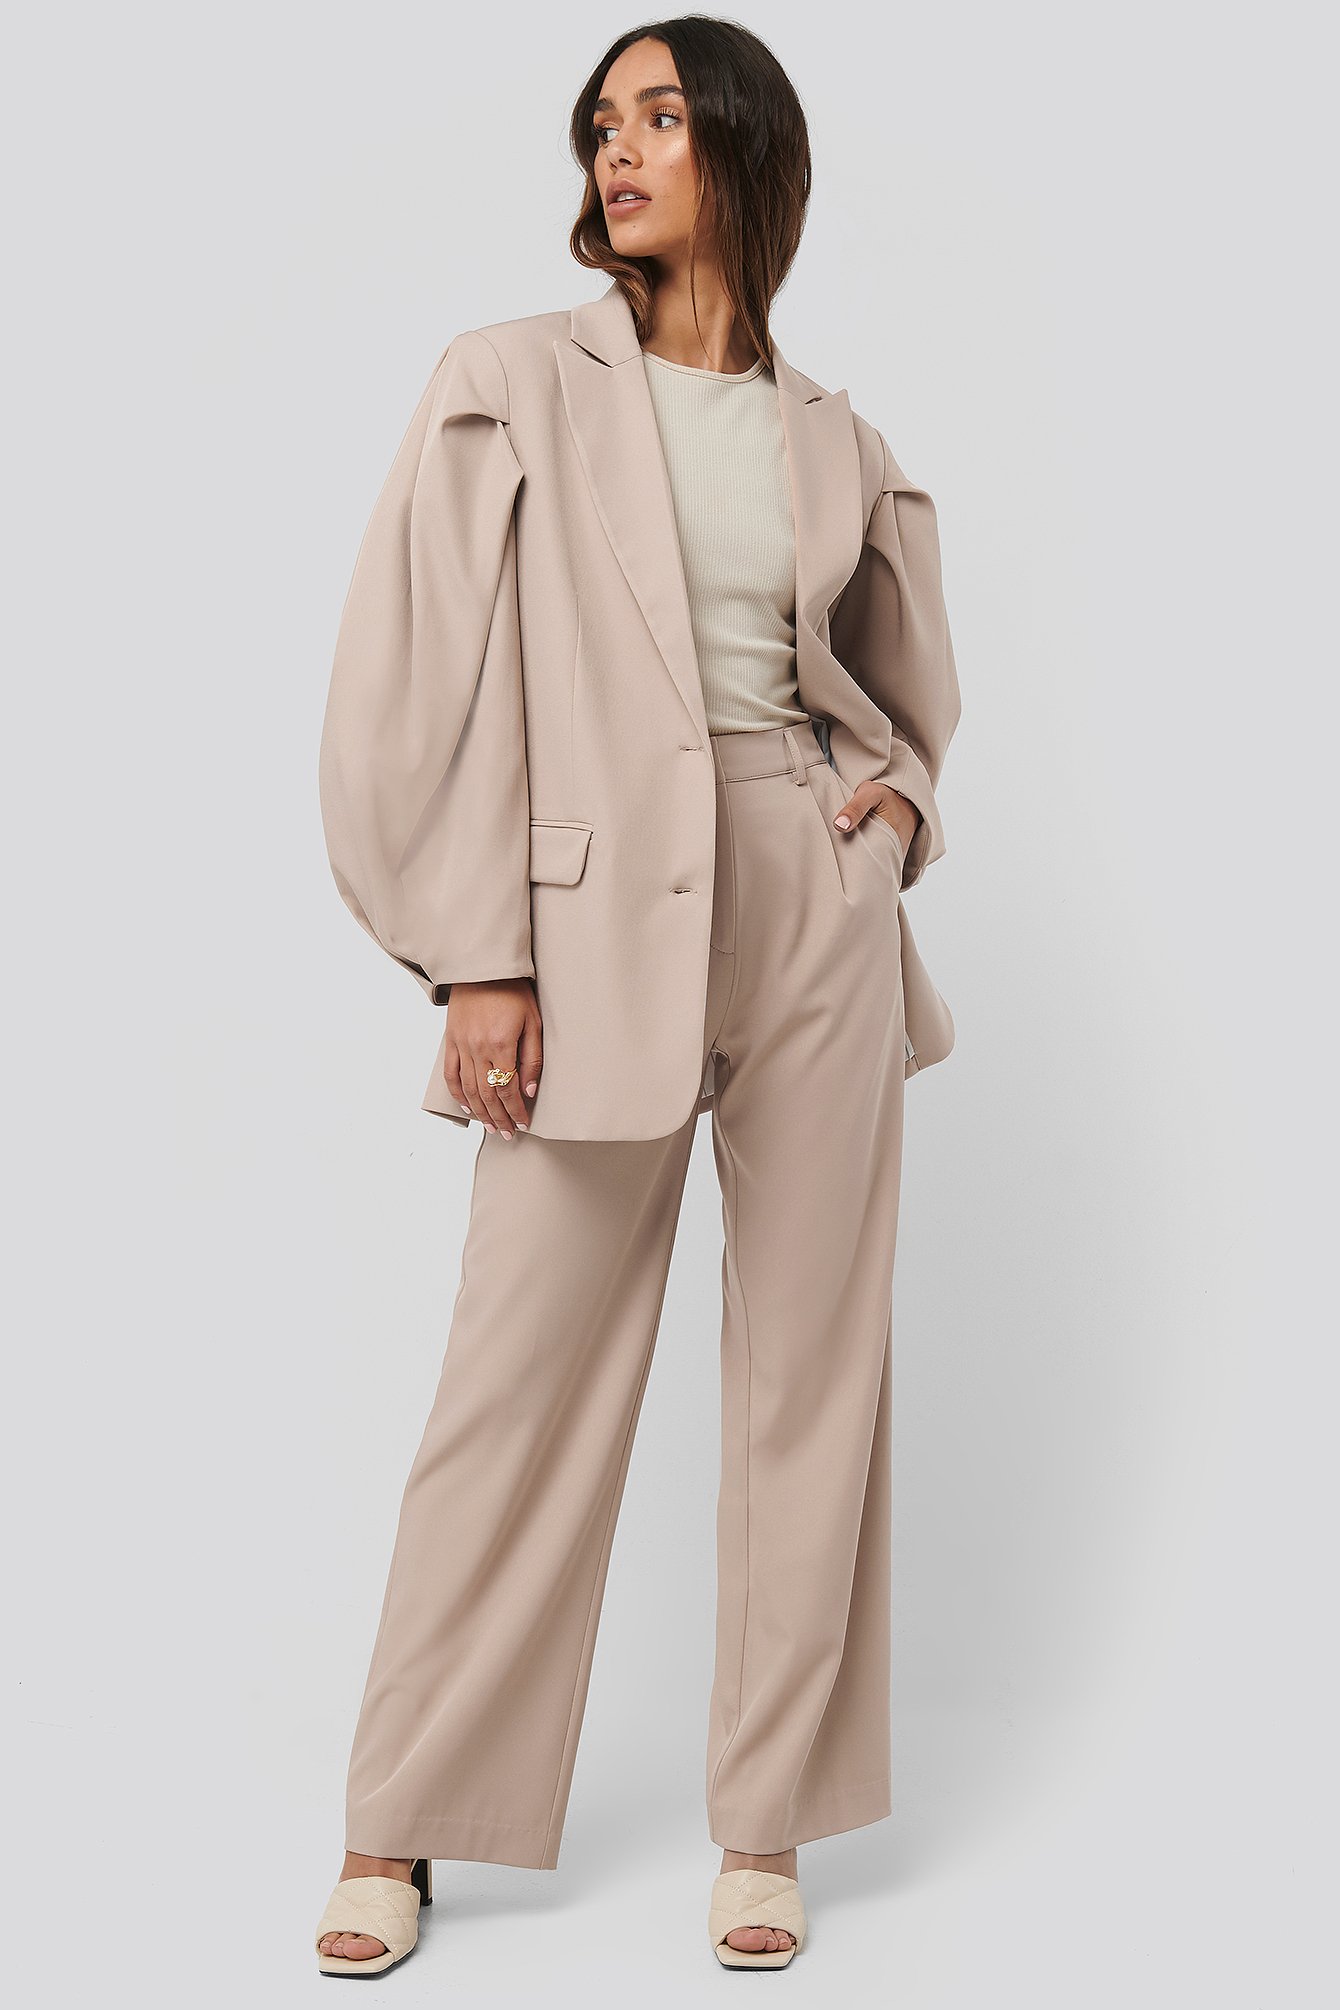 Relaxed Fit Suit Pants Outfit